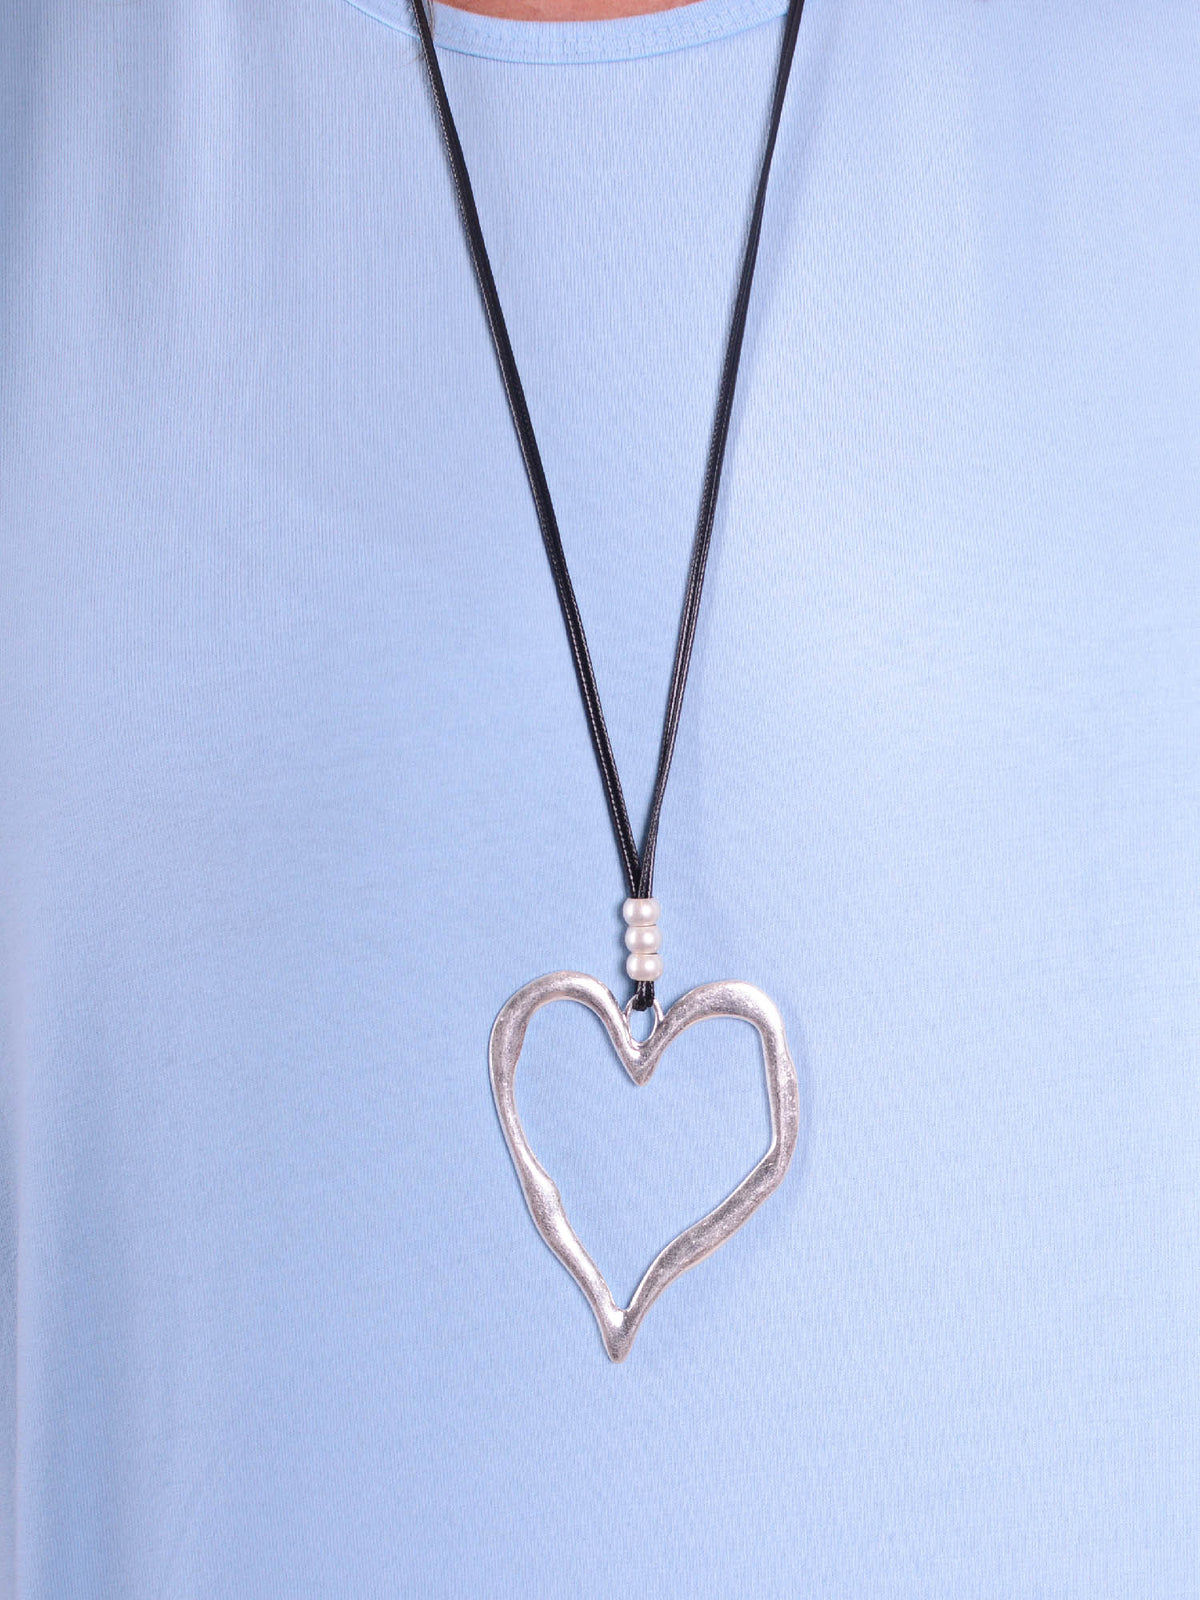 Long Silver Heart Necklace Black Cord - HEART6, Necklaces & Pendants, Pure Plus Clothing, Lagenlook Clothing, Plus Size Fashion, Over 50 Fashion